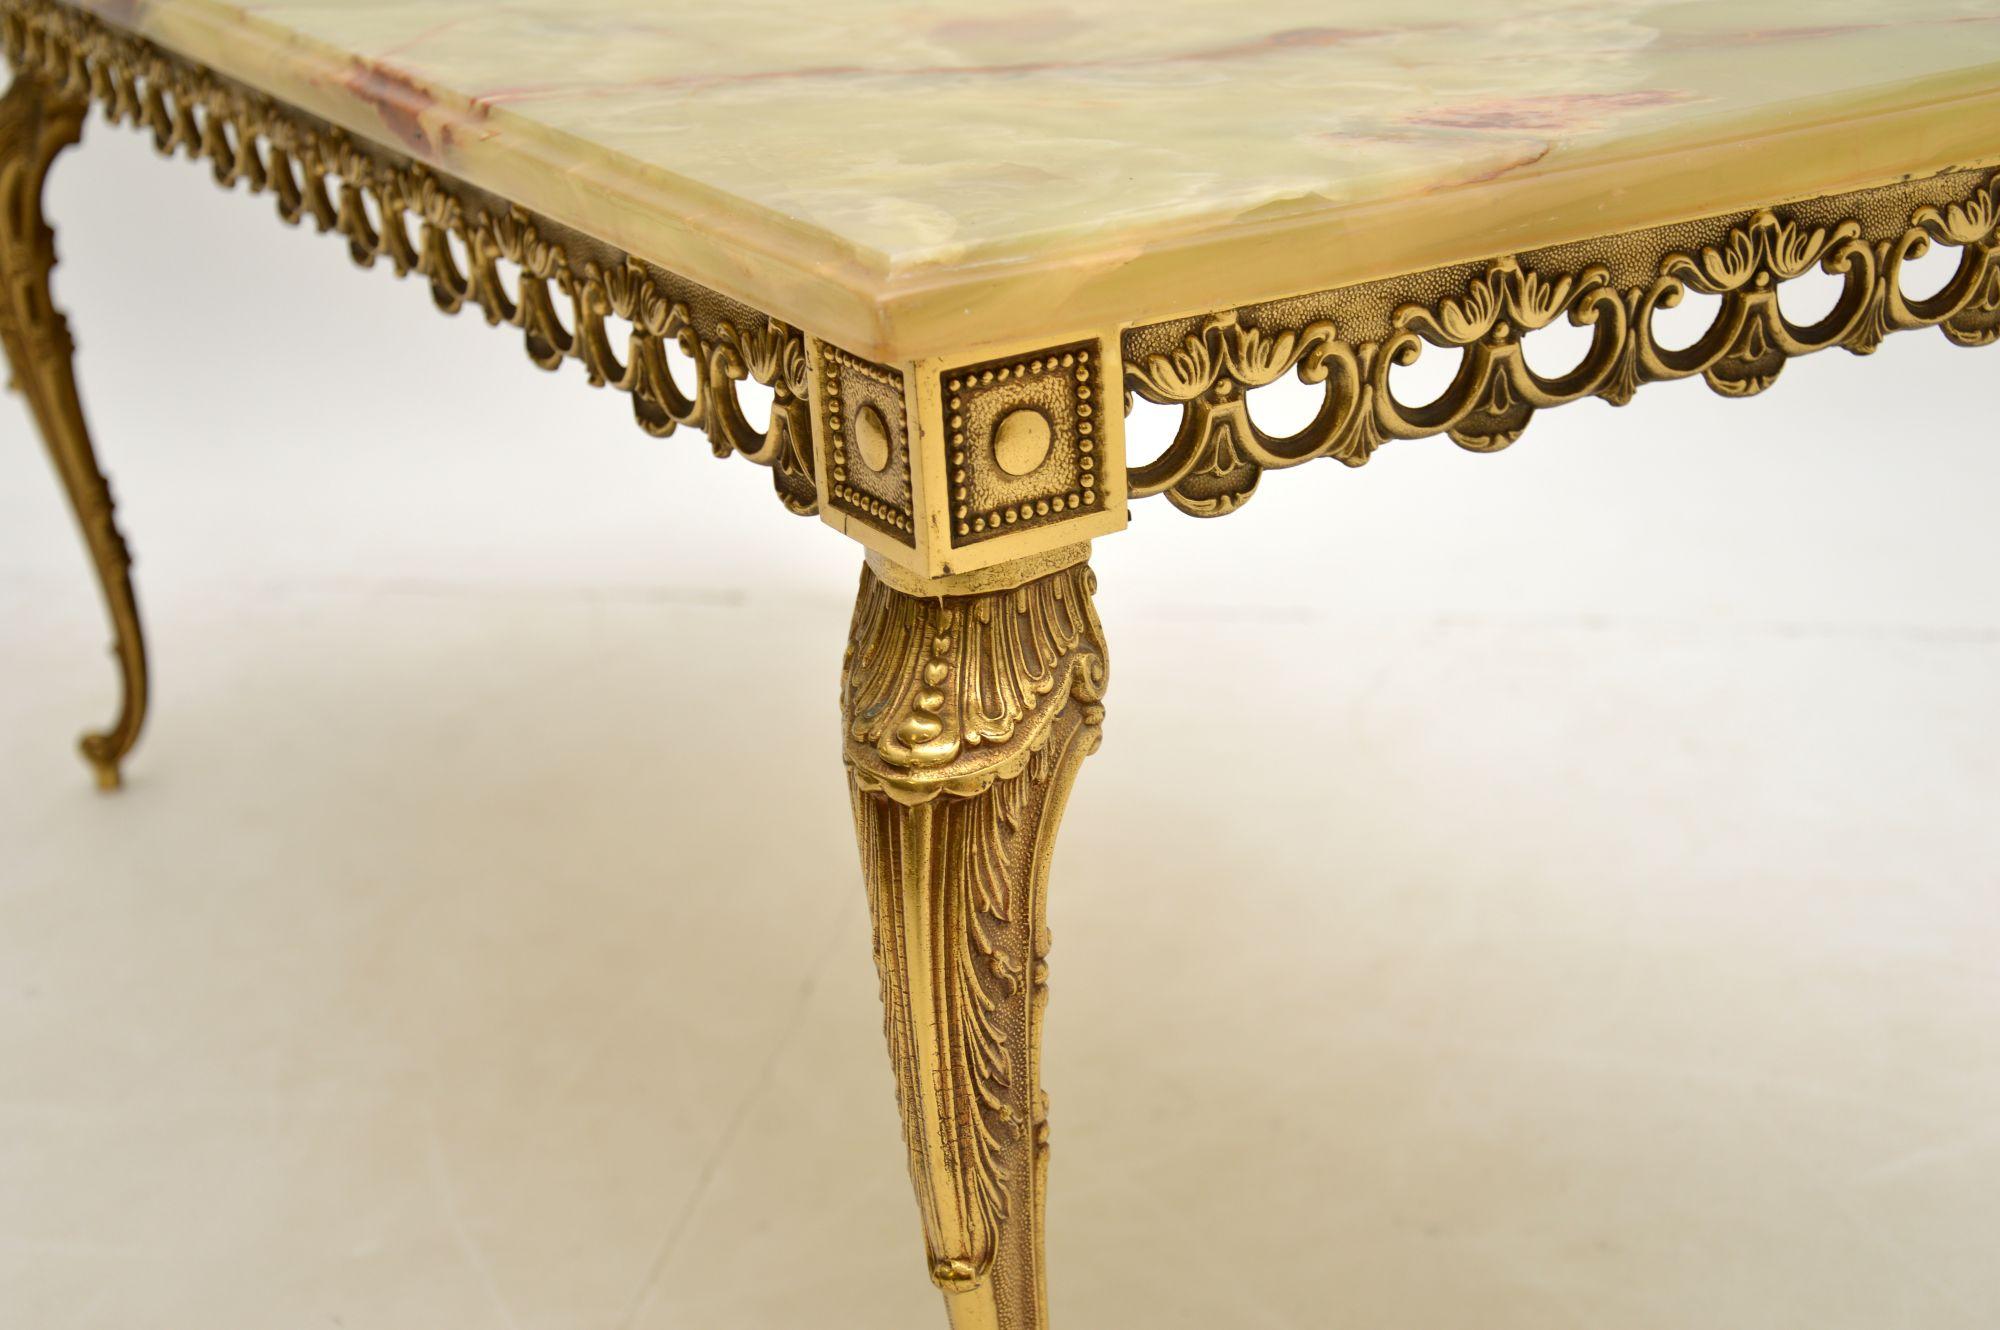 Antique French Onyx & Brass Coffee Table 2